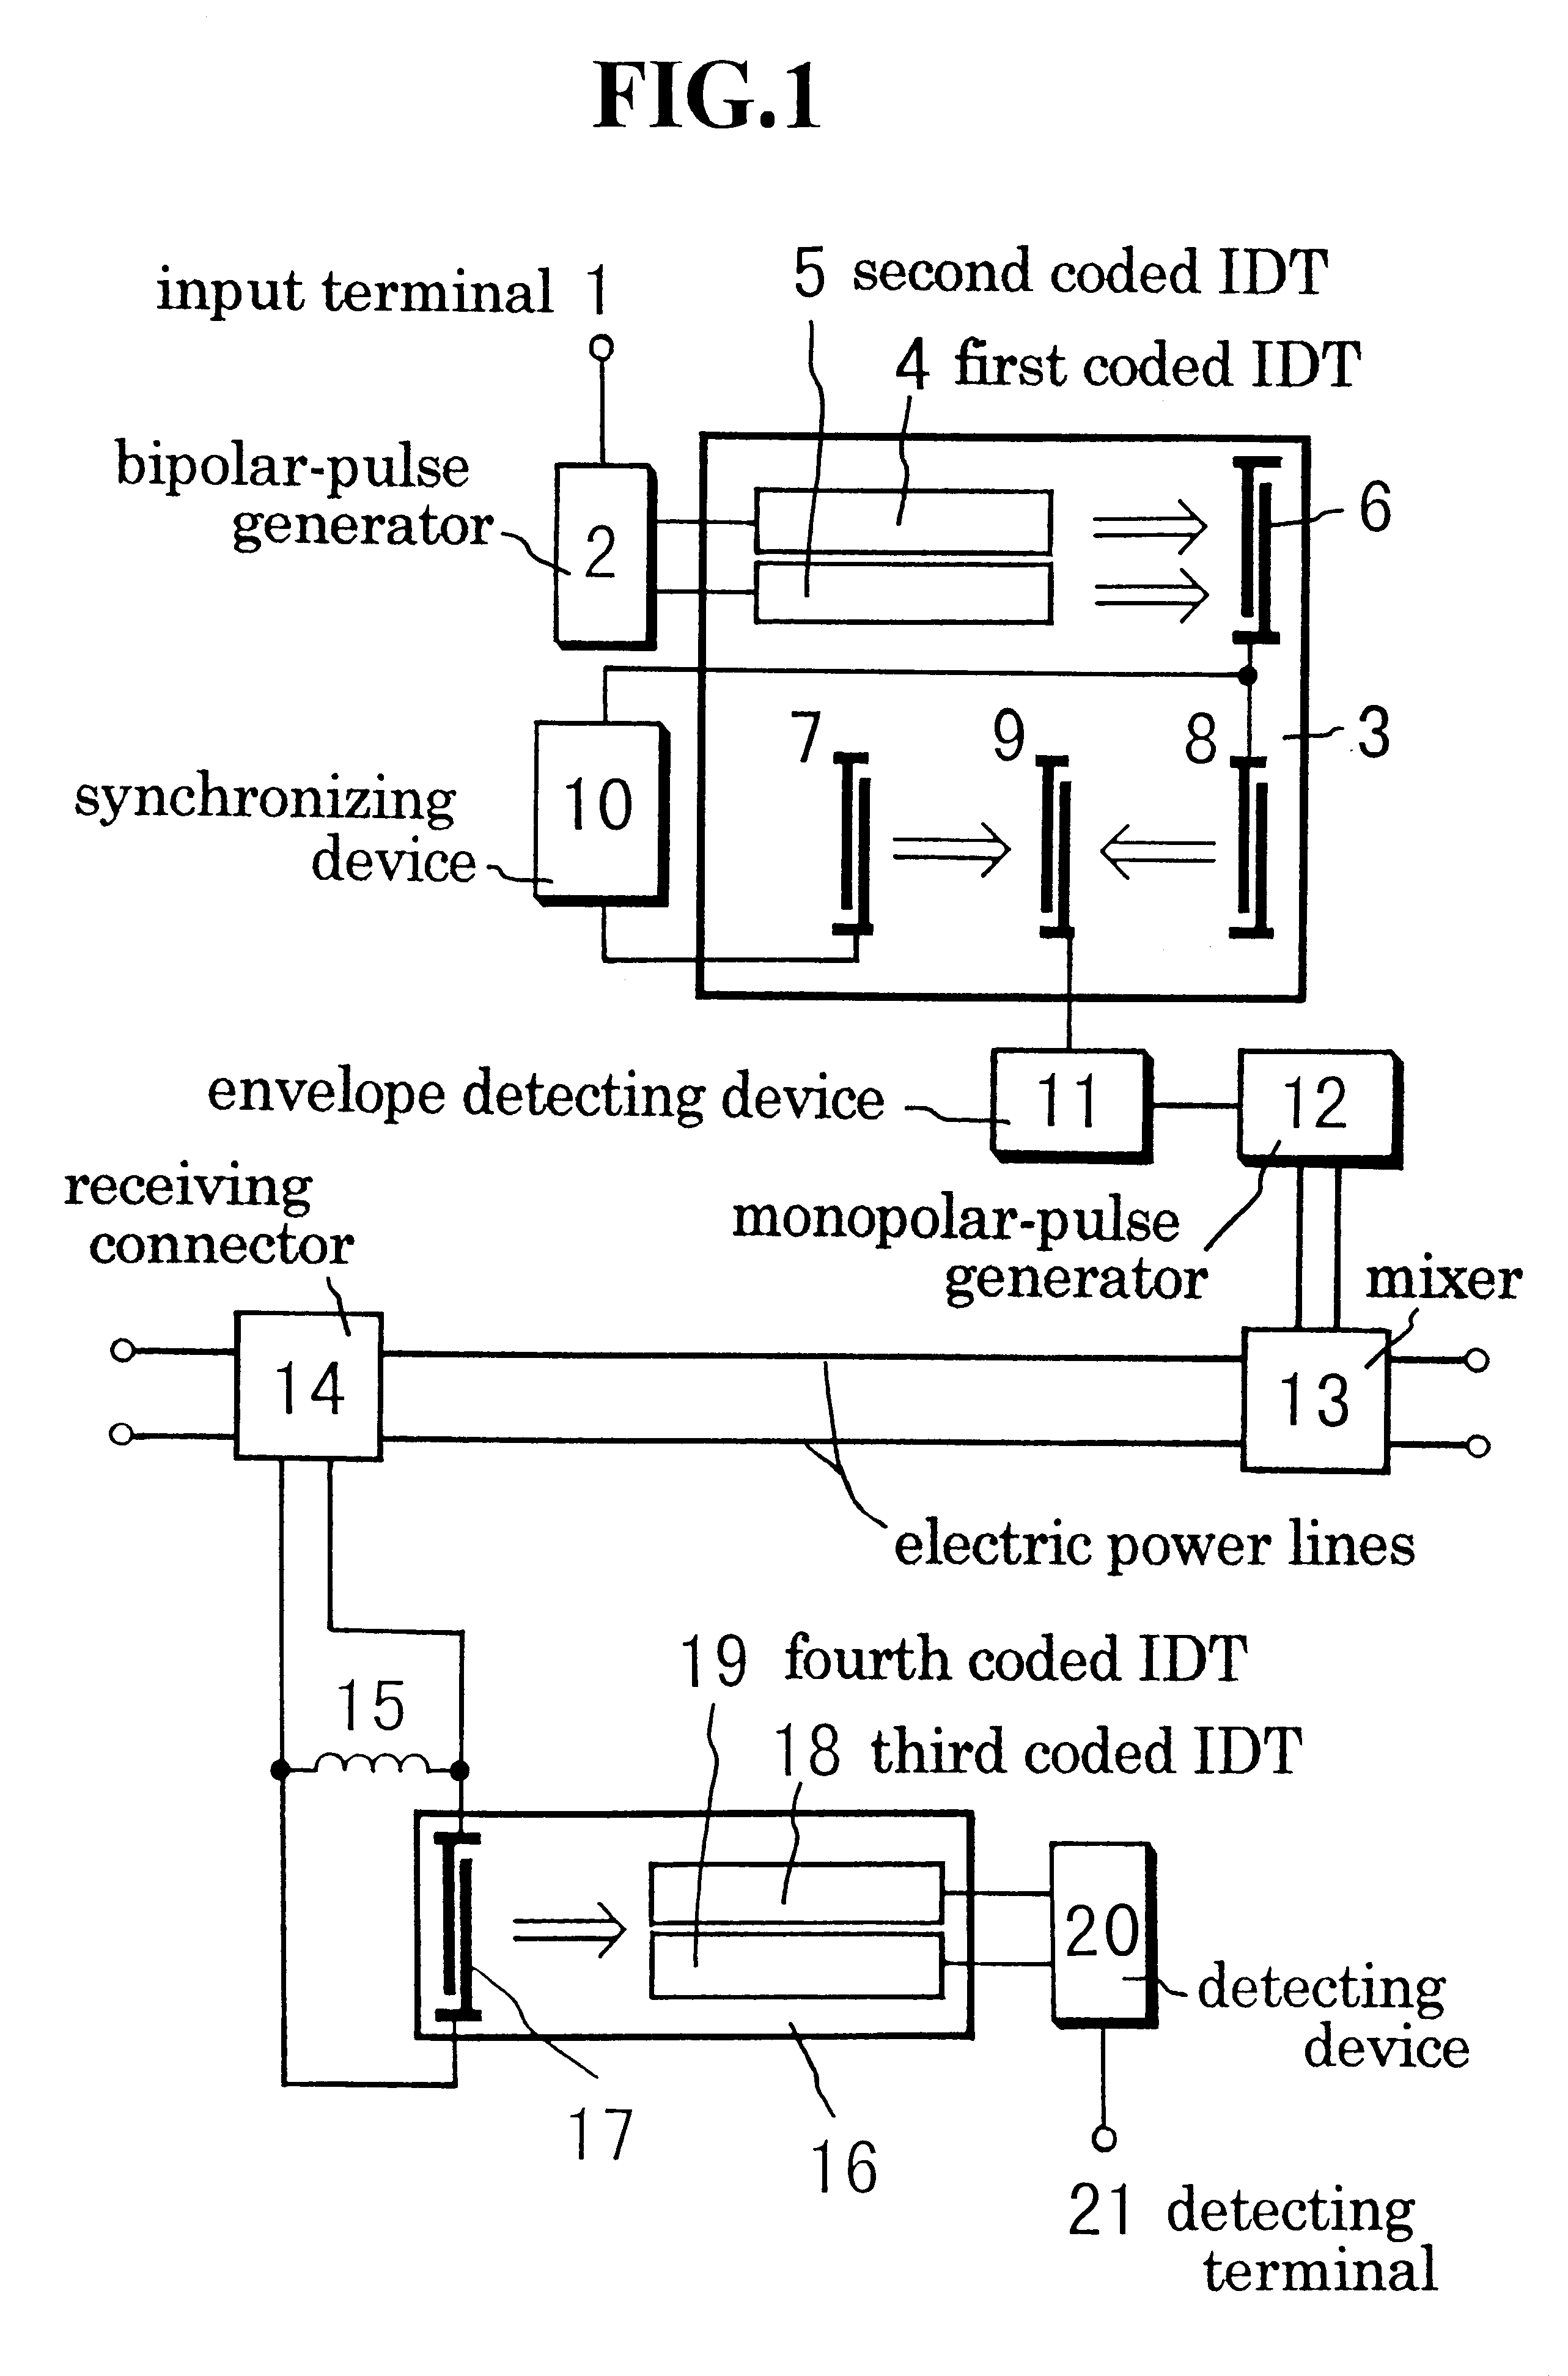 Transmitting and receiving system for digital communication on electric power-lines